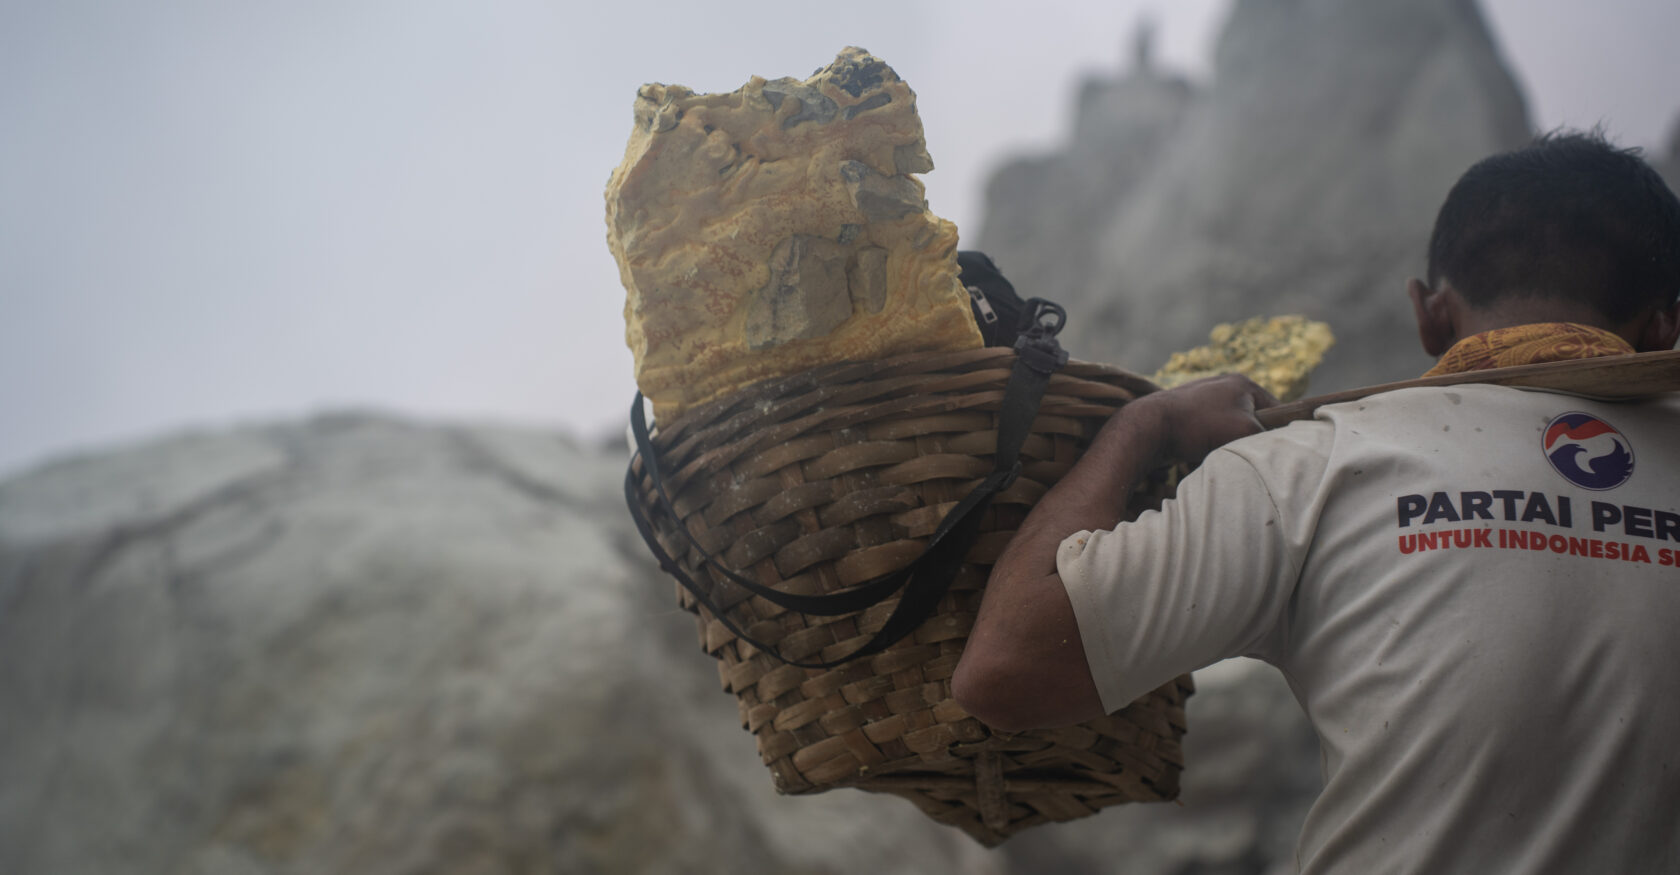 The miners carry loads of sulfur that sometimes weigh up to 200 pounds (Alexandros Zilos)